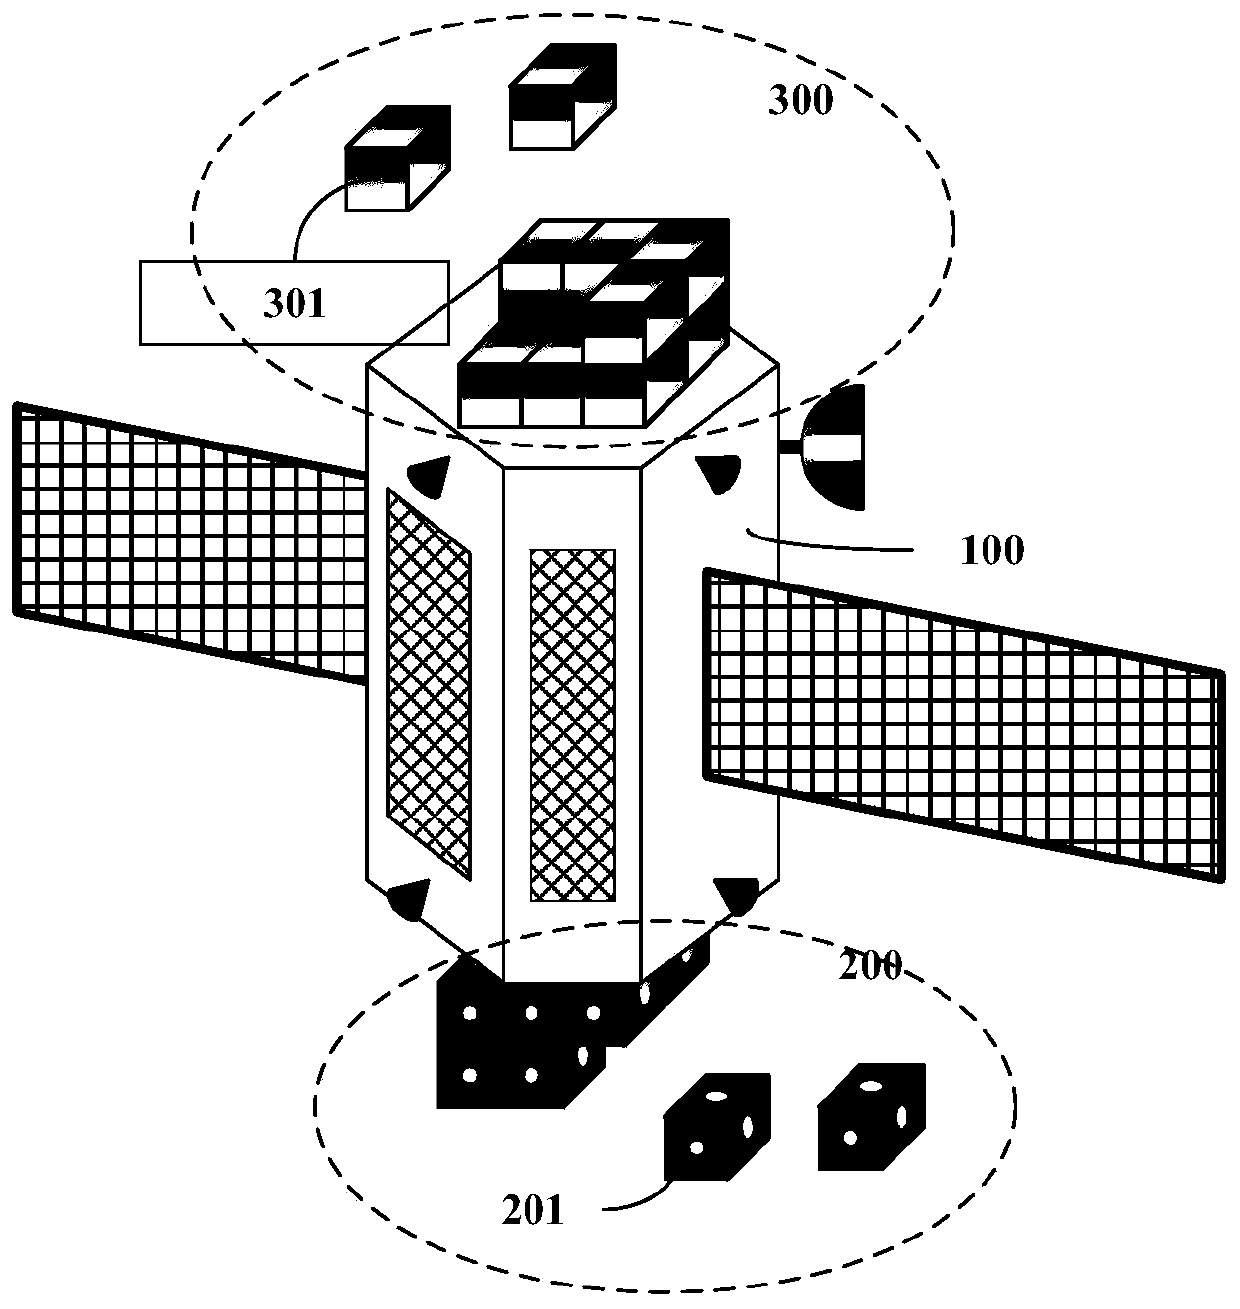 Space non-cooperative target capture system and method based on micro-nano satellite cluster